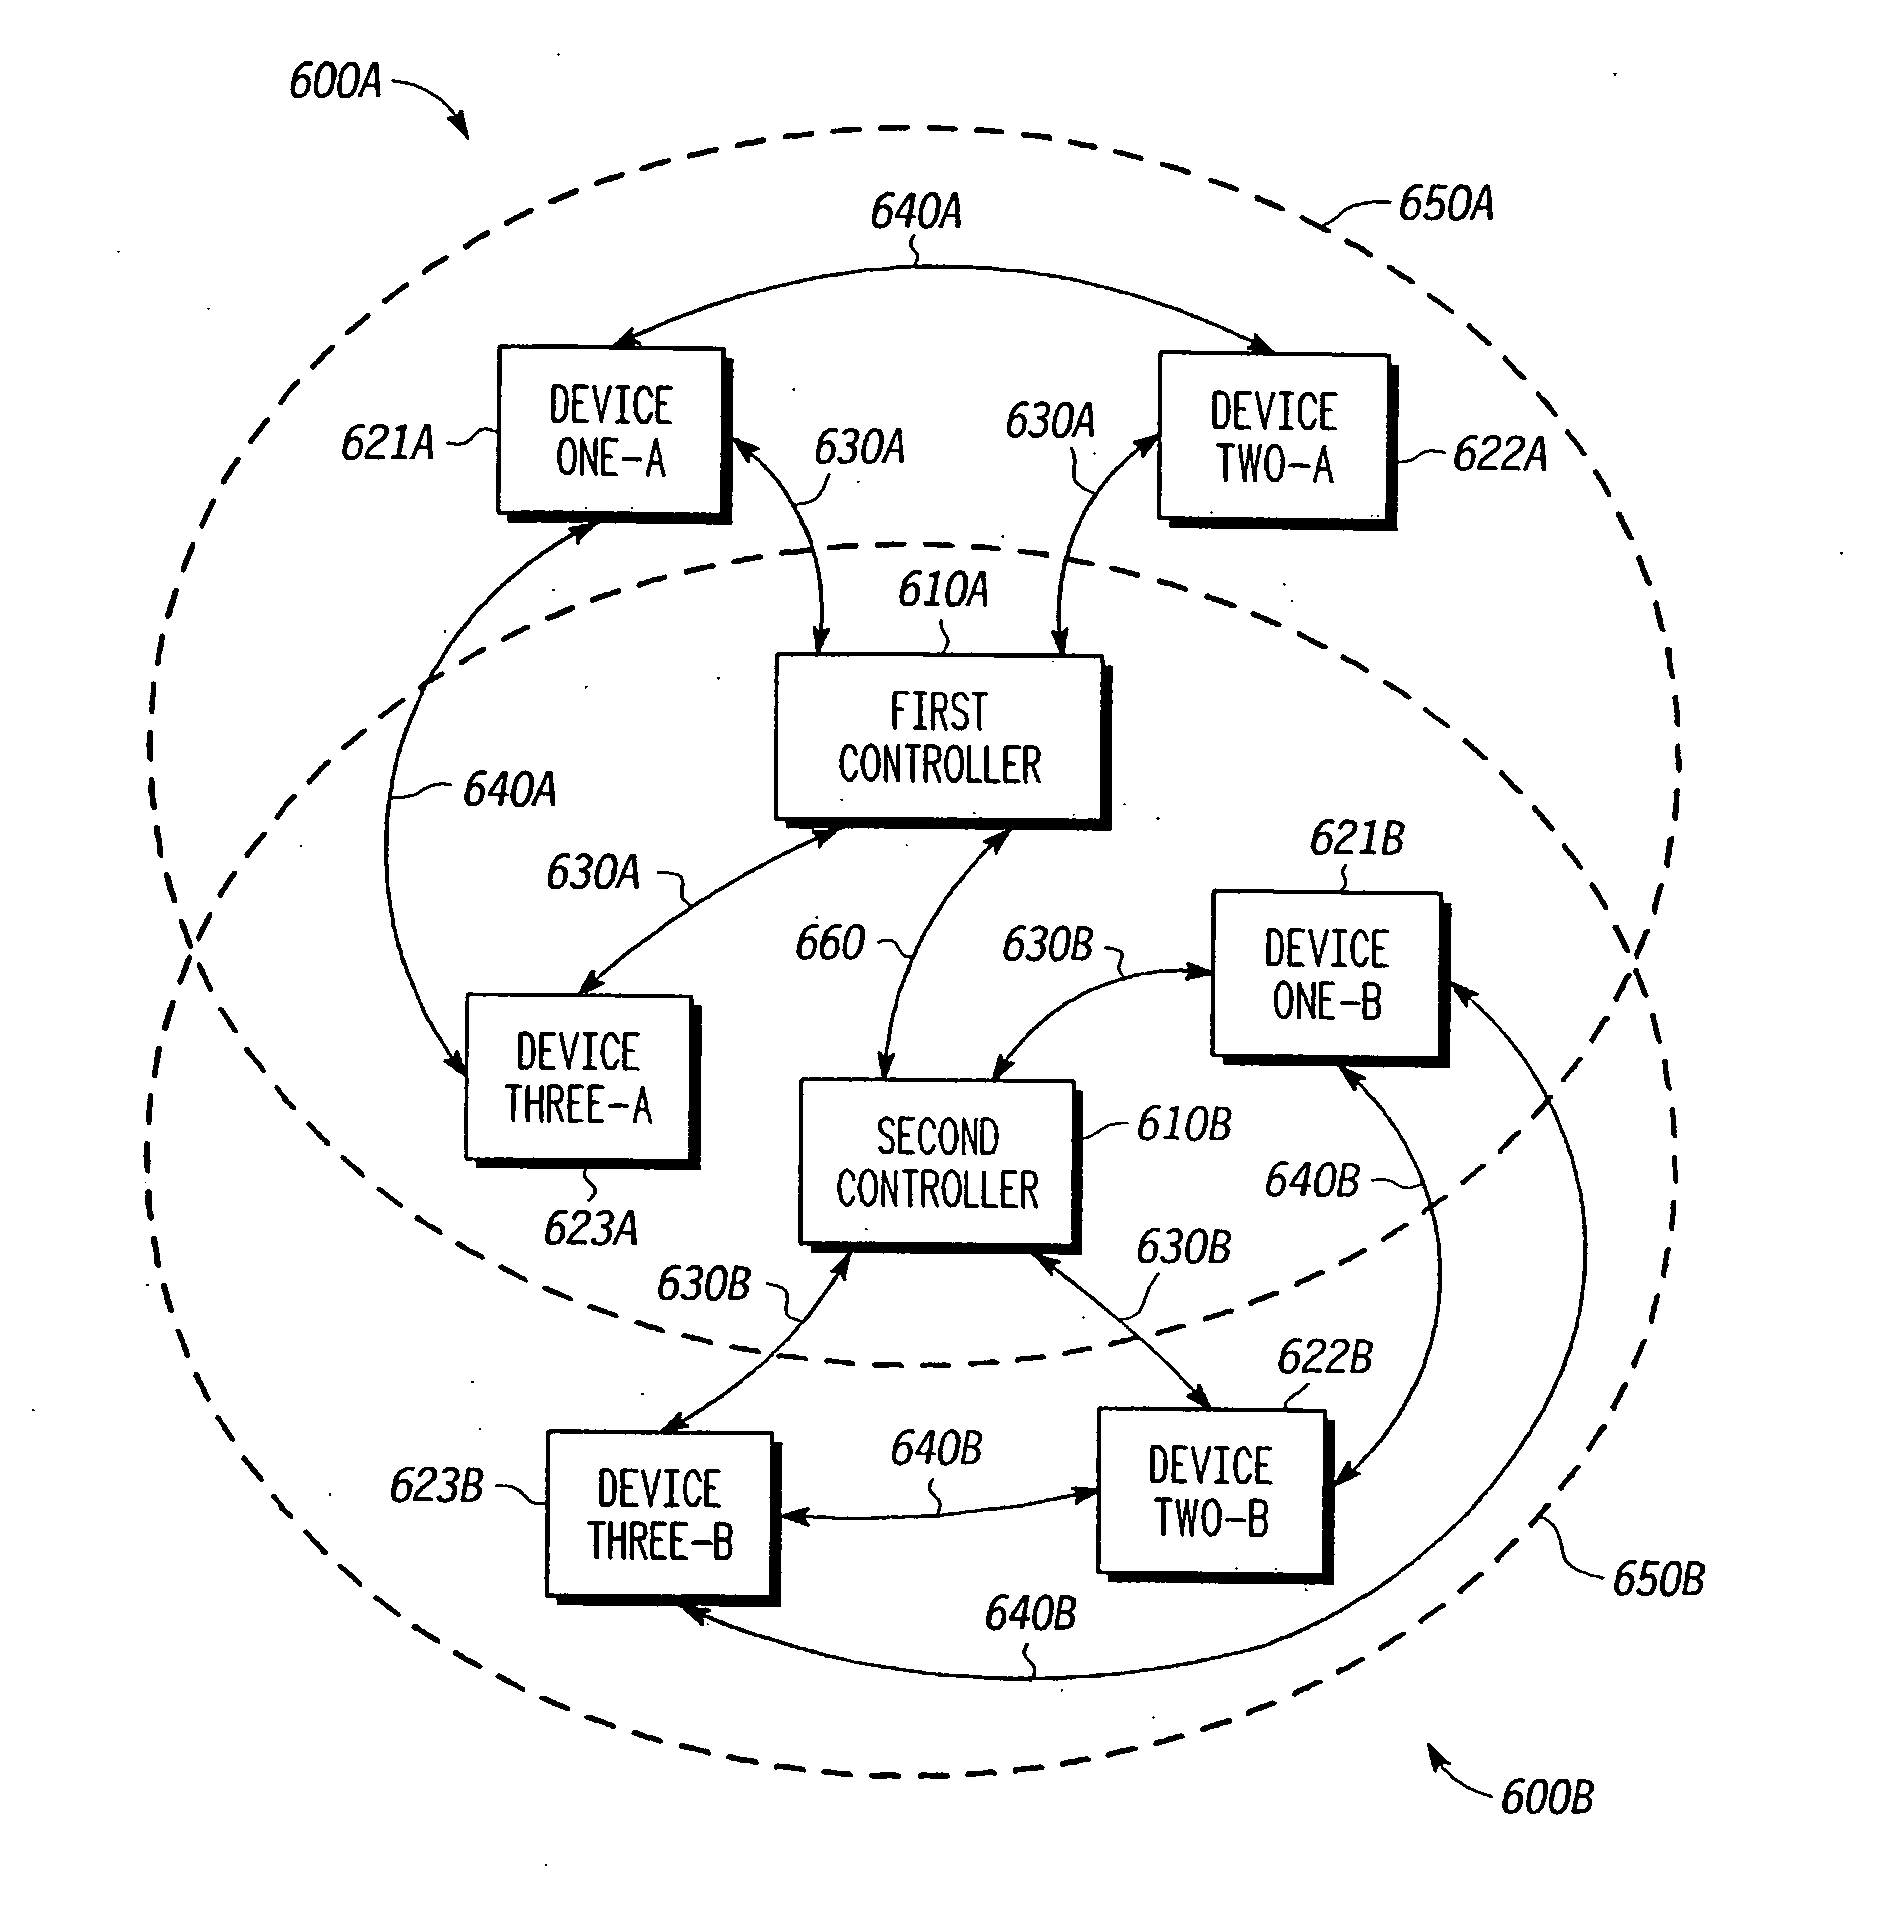 Method for controlling operation of a child or neighbor network